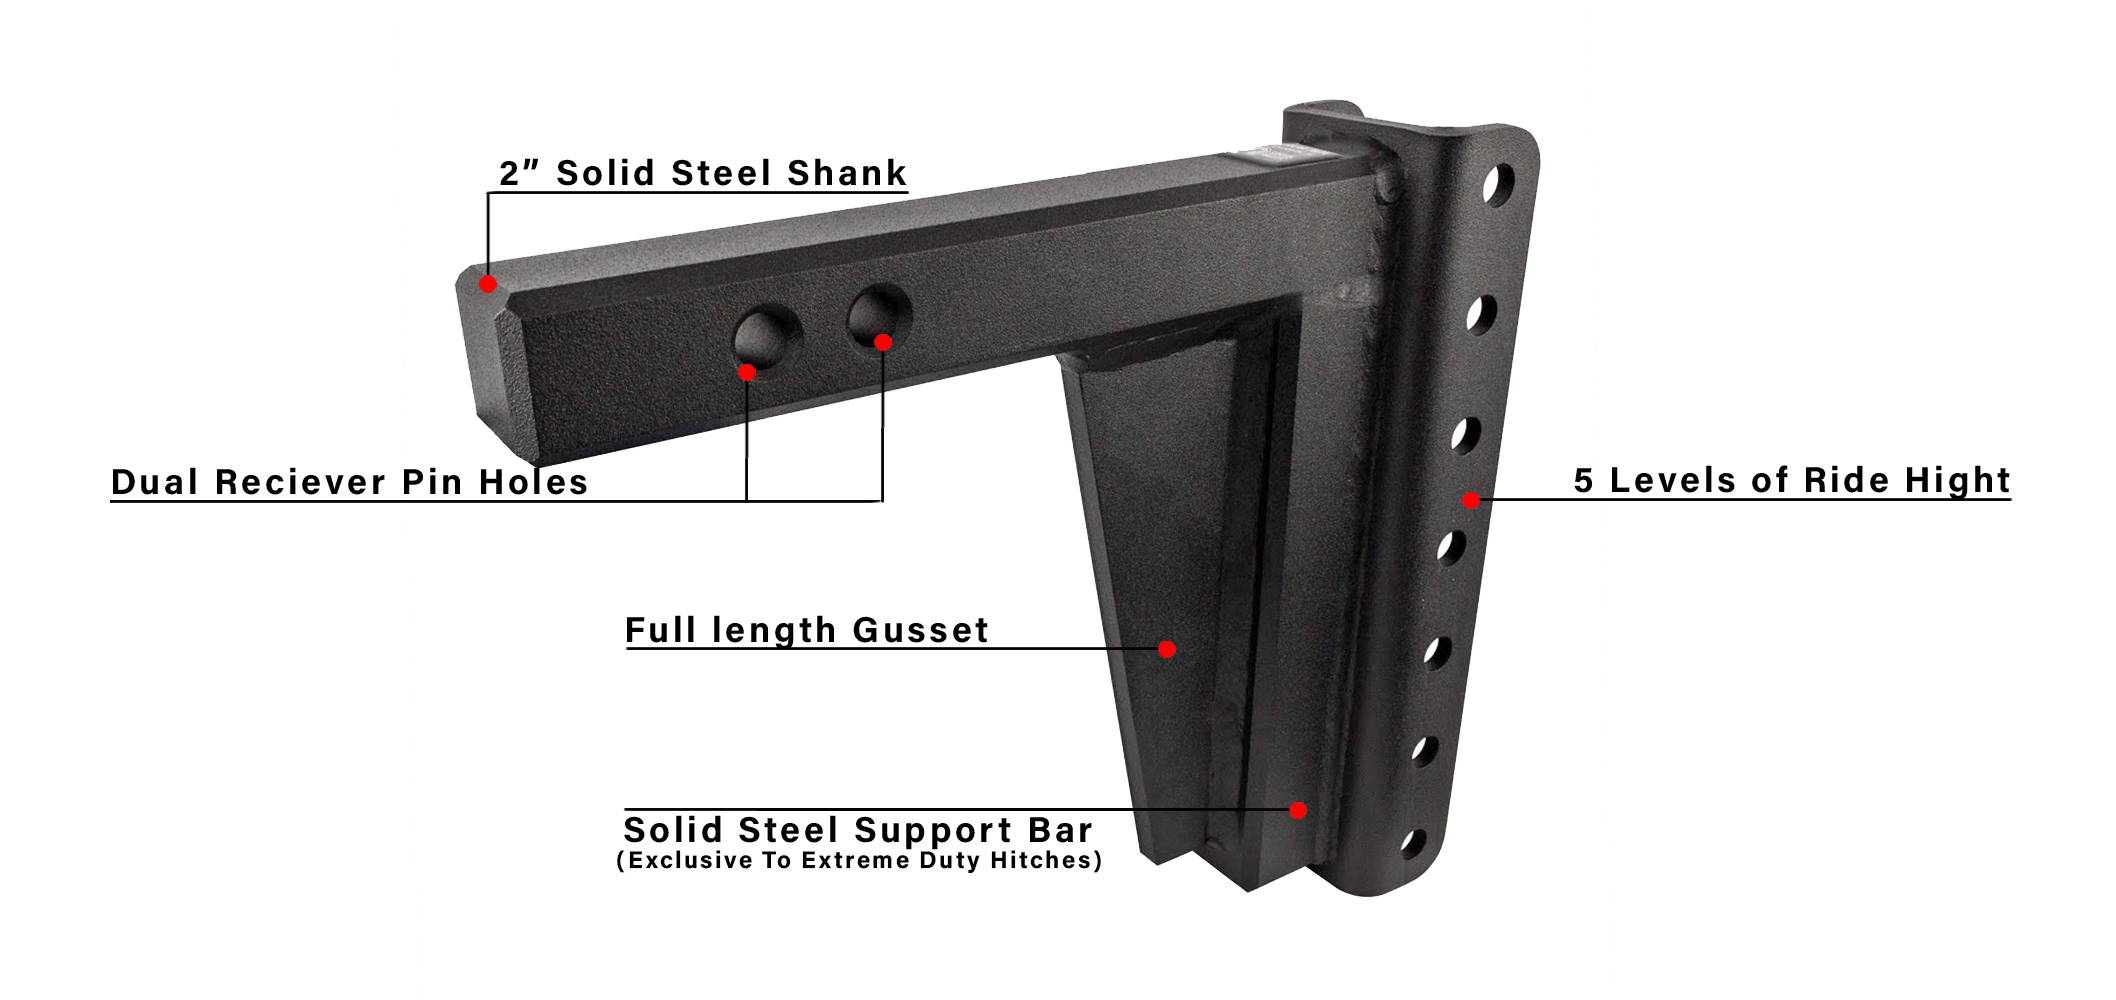 Features of BulletProof Hitches Solid Steel Shank